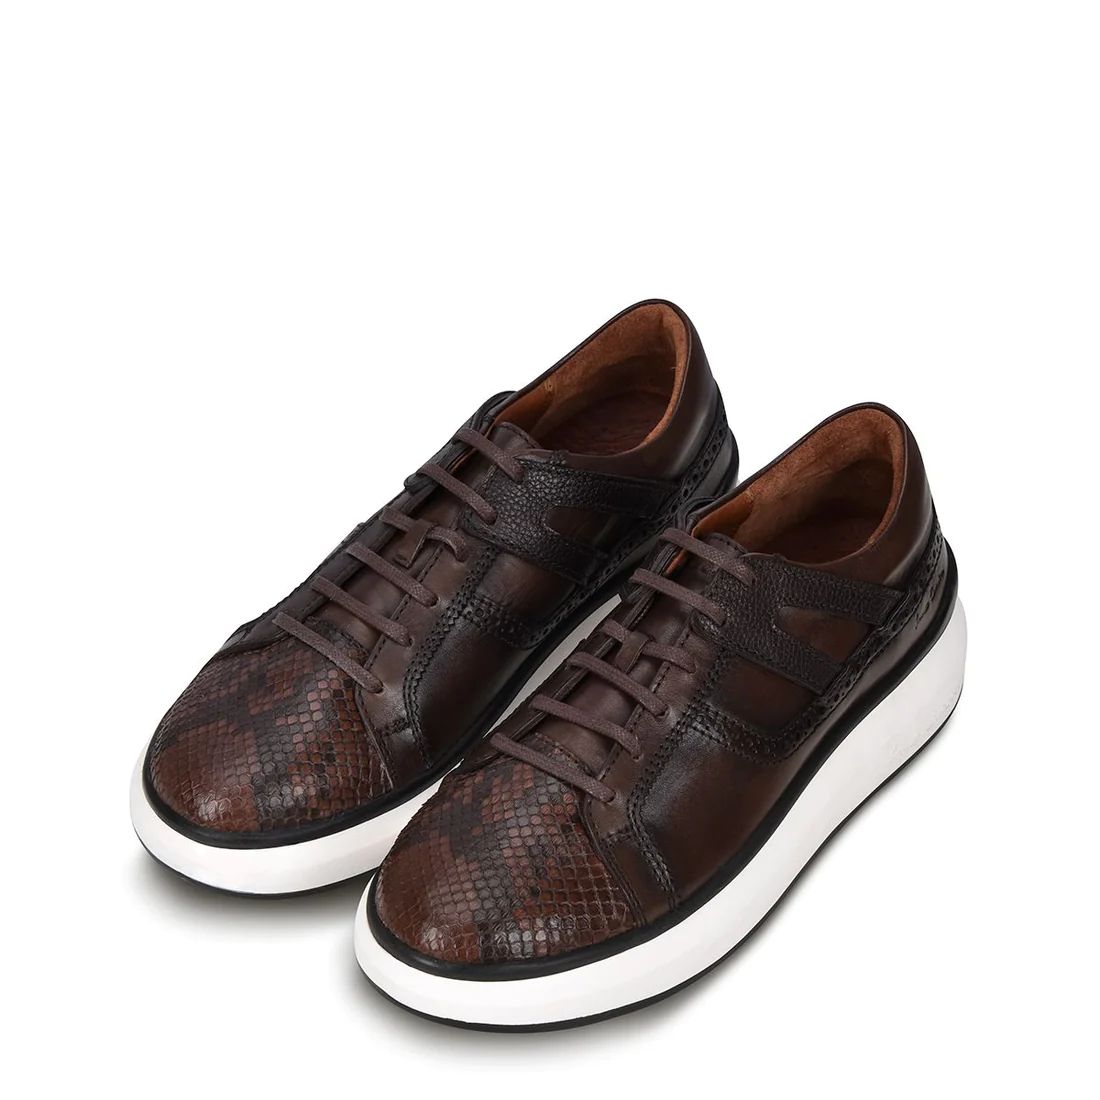 Cuadra | Hand-Painted Python Chocolate Leather Sneakers